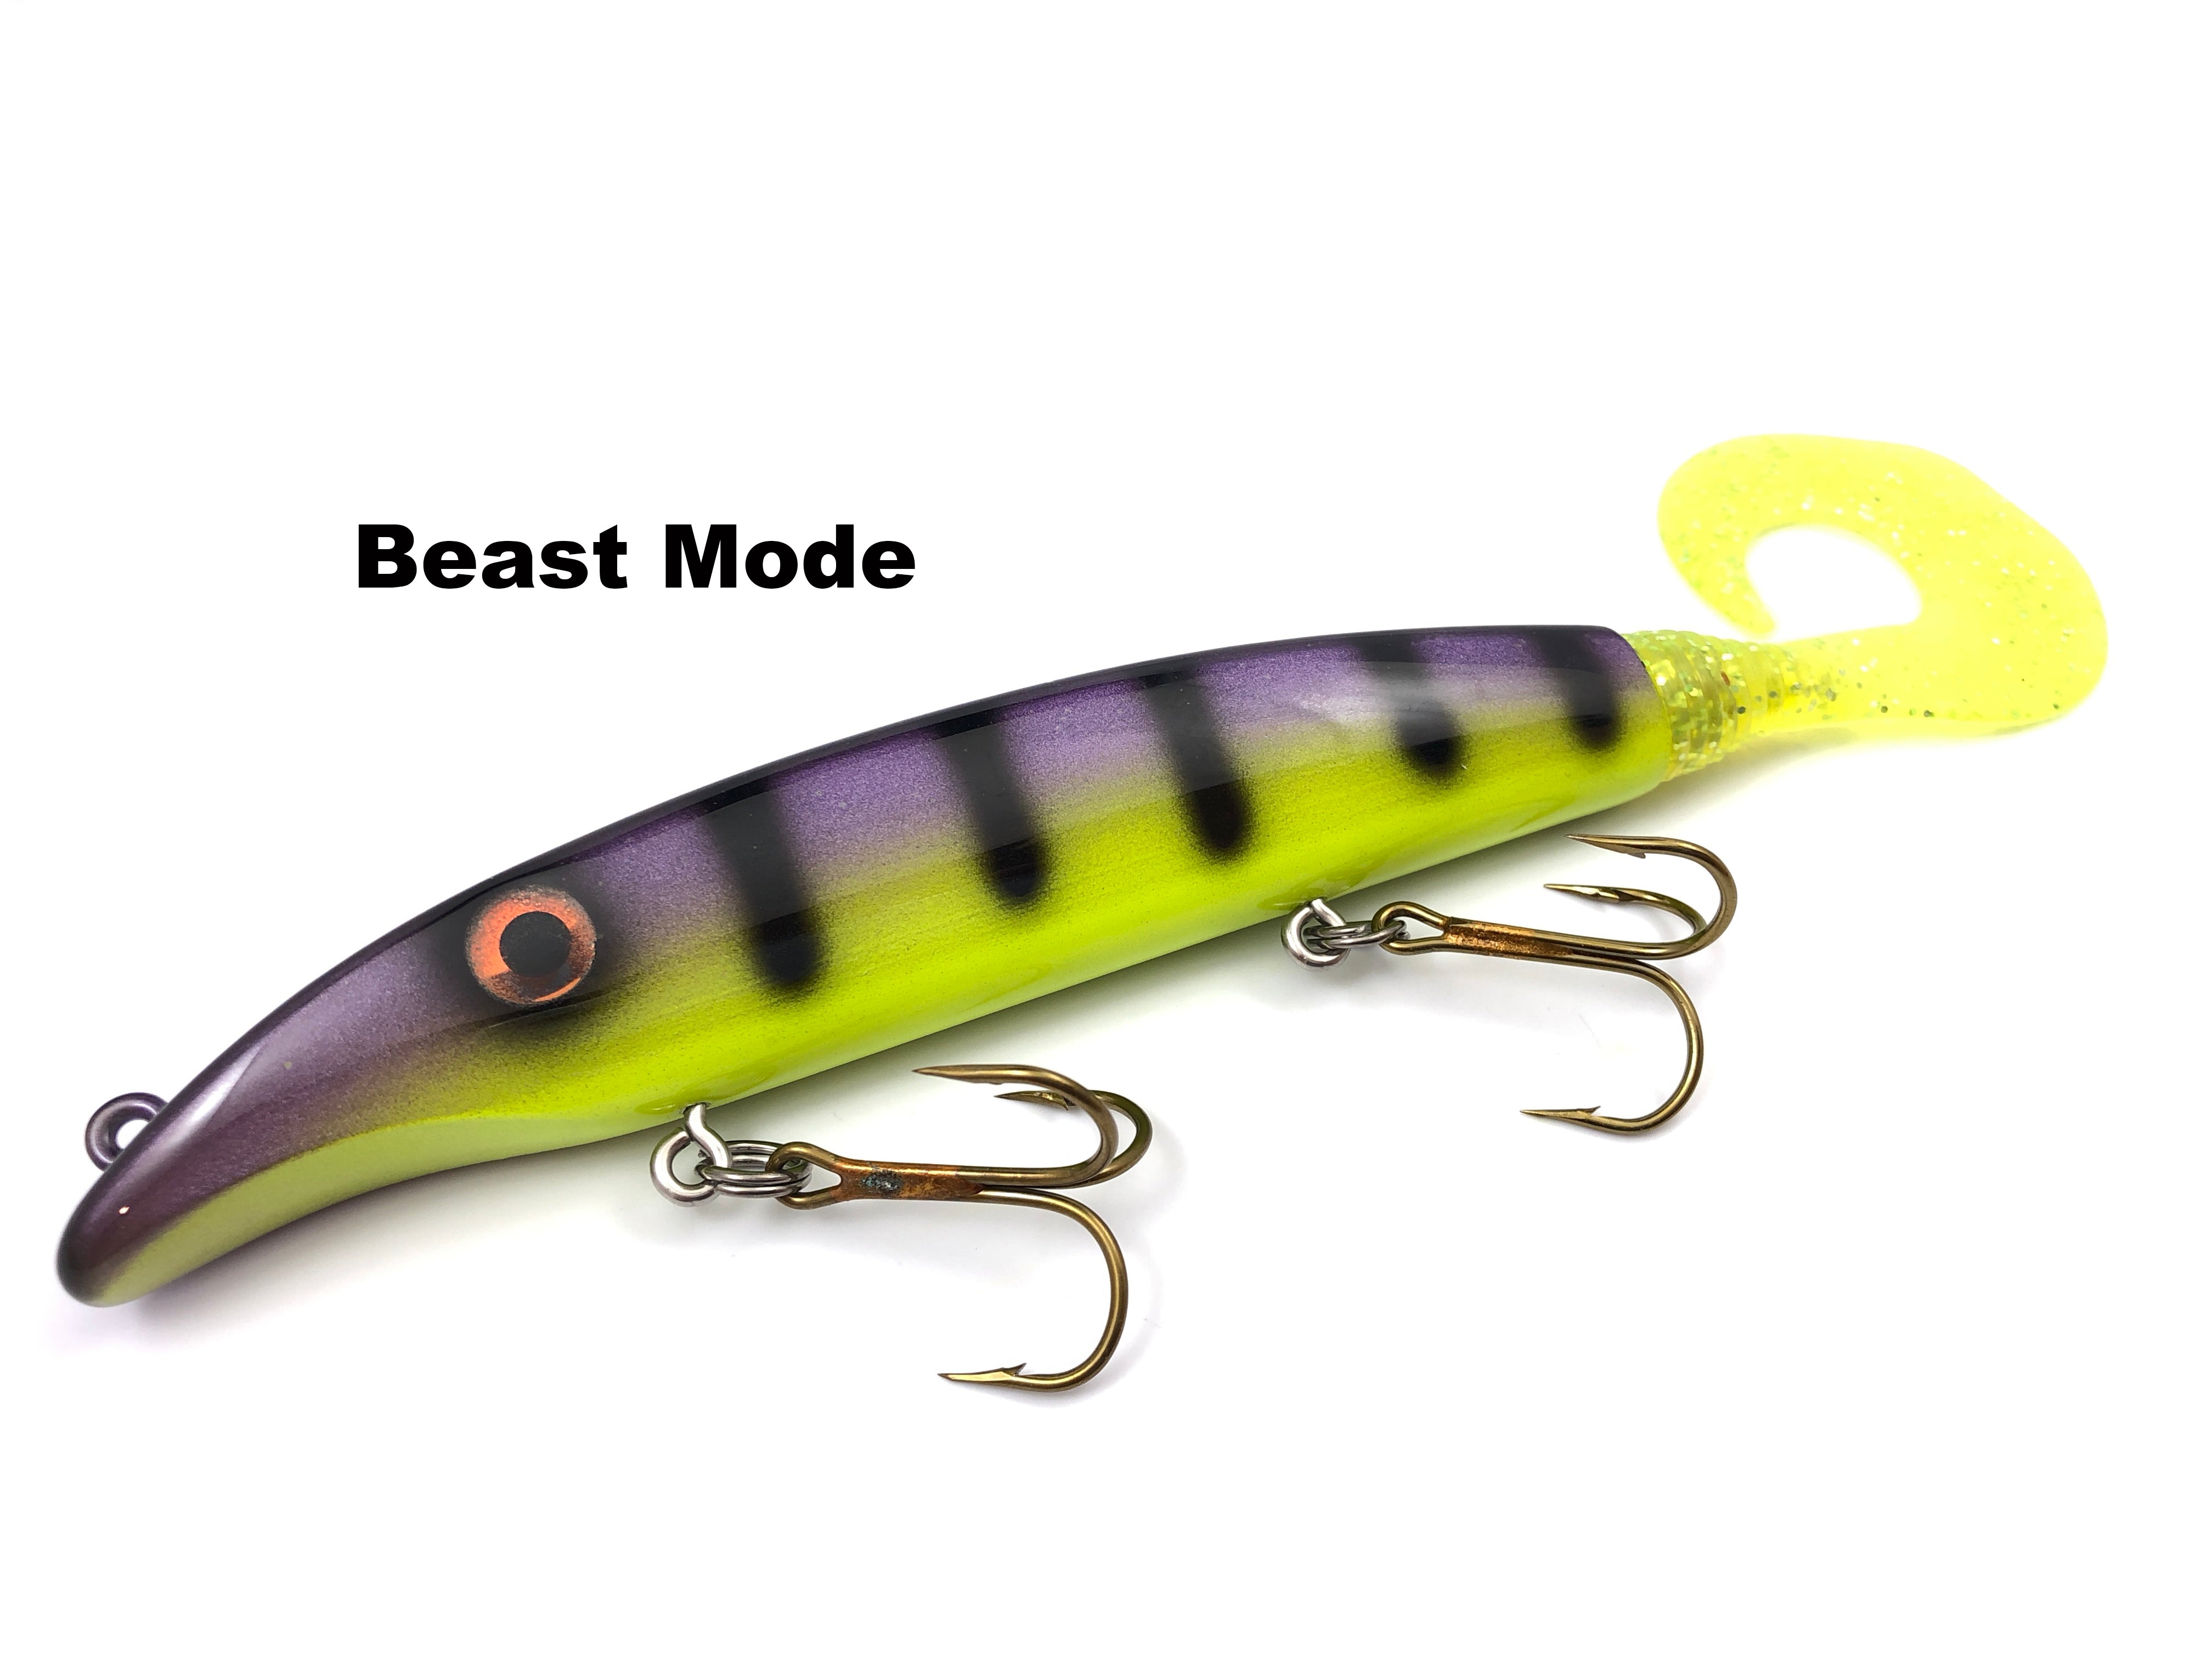 Fat A.Z. Musky Products 10 Raptor - Musky Tackle Online